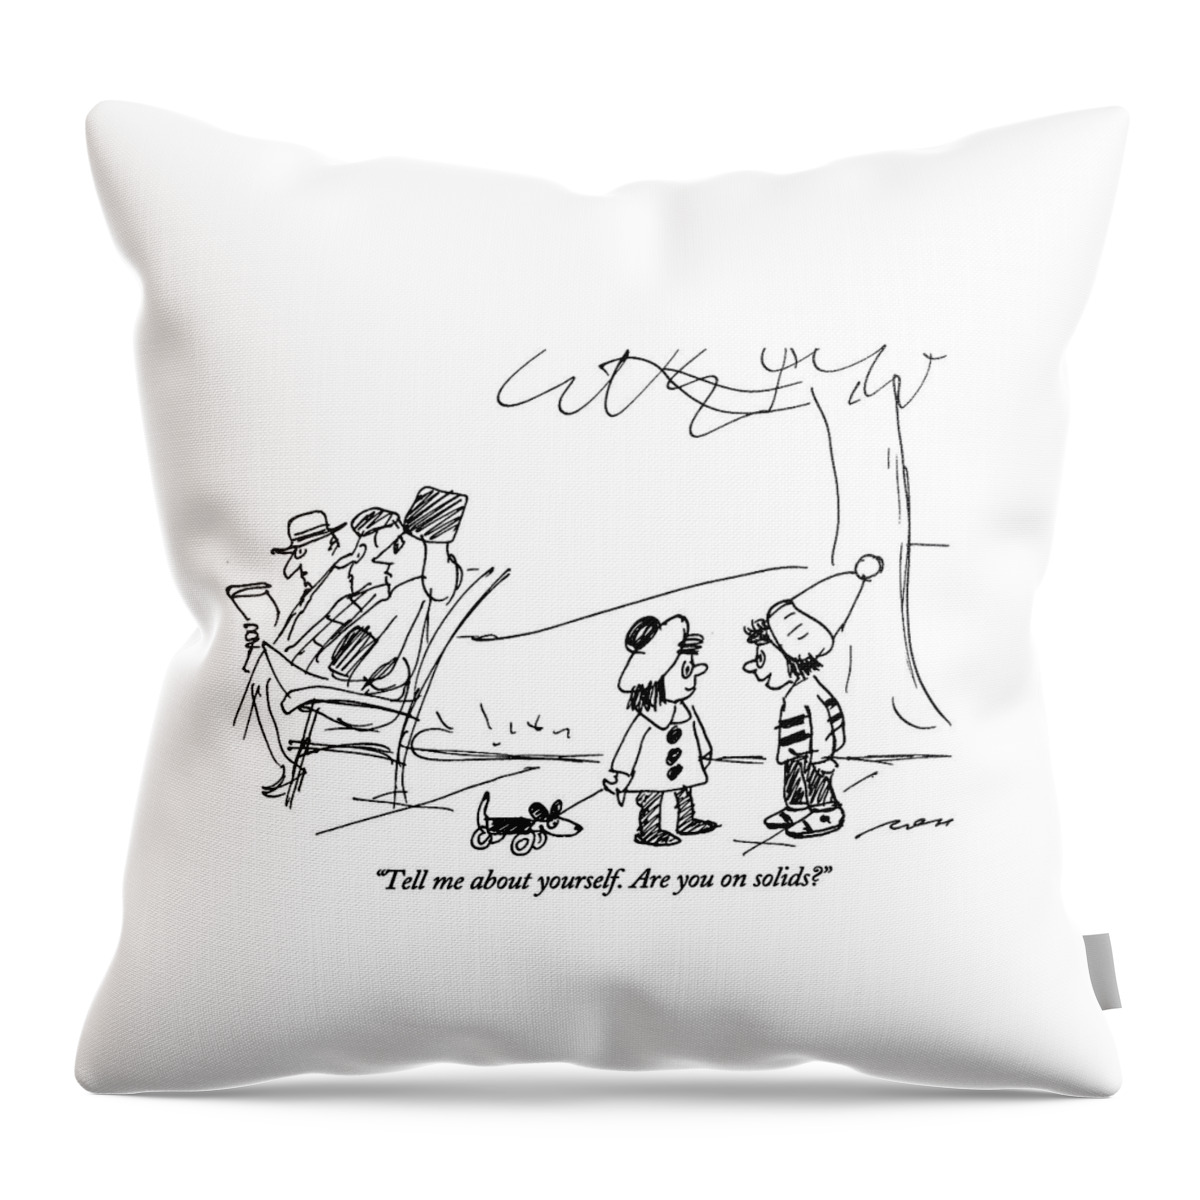 Tell Me About Yourself.  Are You On Solids? Throw Pillow